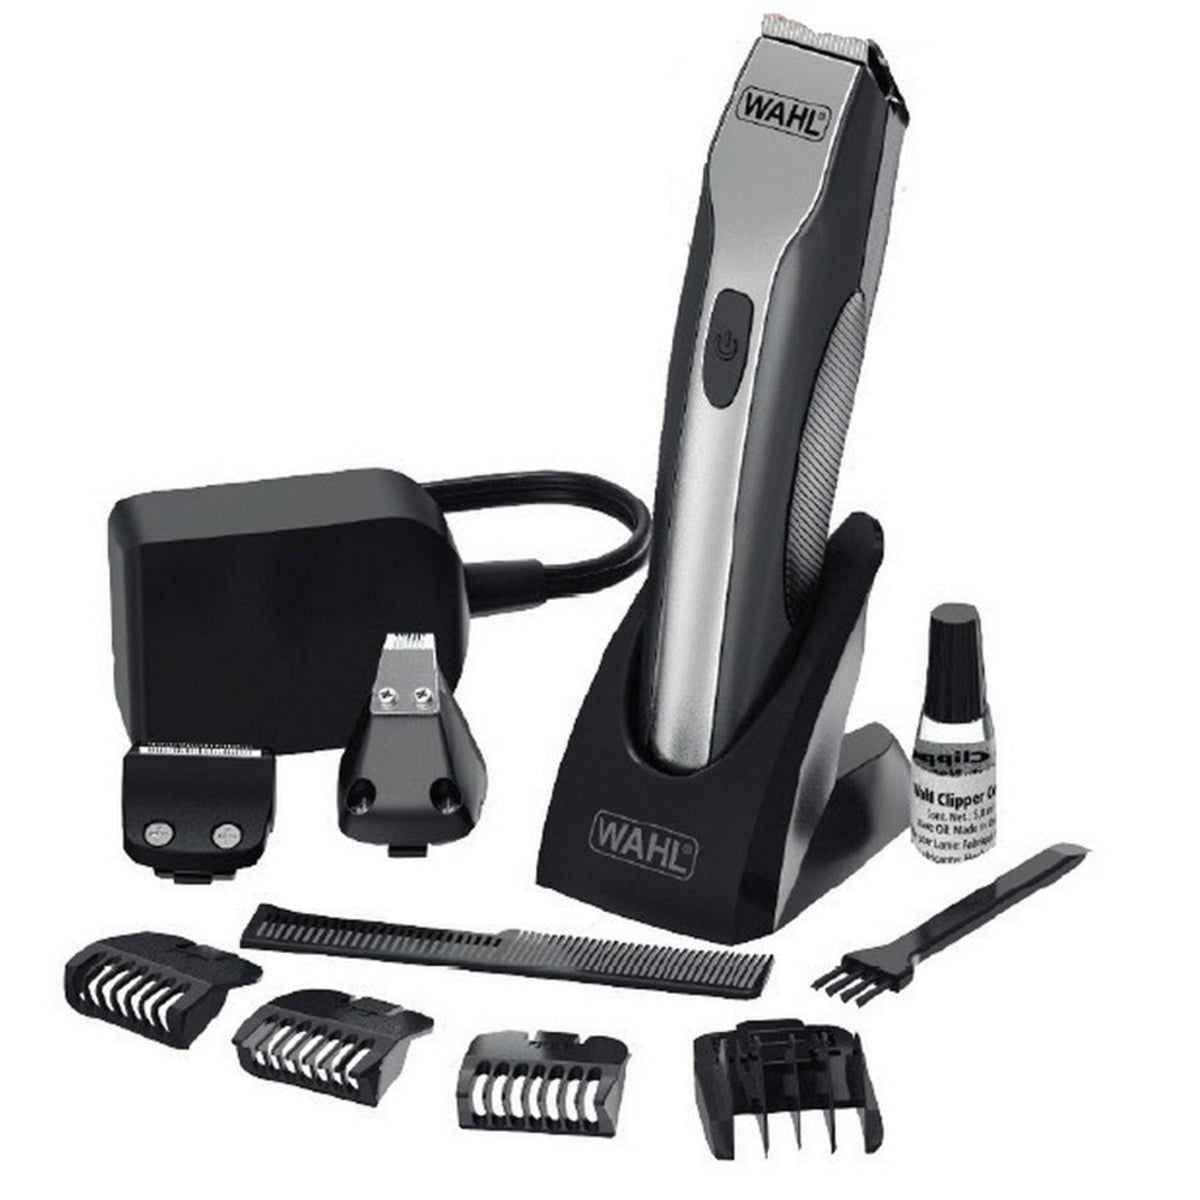 Wahl Optimus Lithium Ion 3 Pin Trimmer, 09885-027